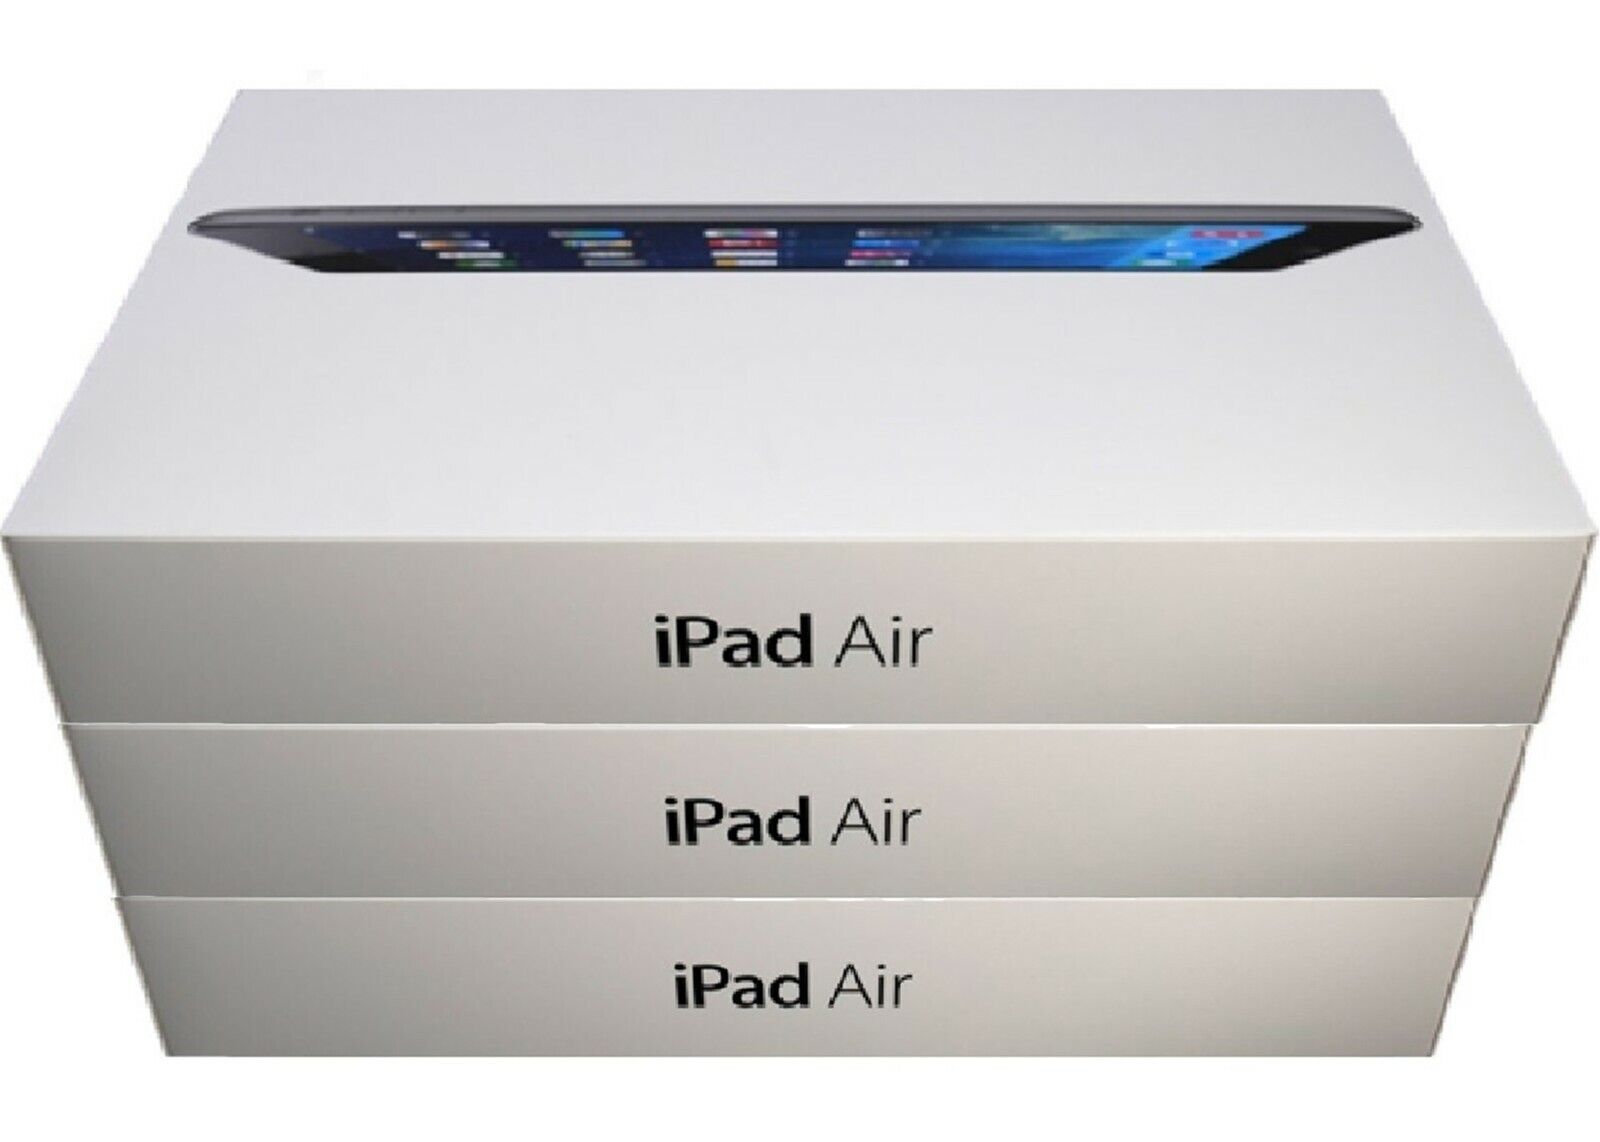 Original Box - Apple iPad Air, 16GB, Silver, Wi-Fi Only, 9.7-inch, and Newest OS